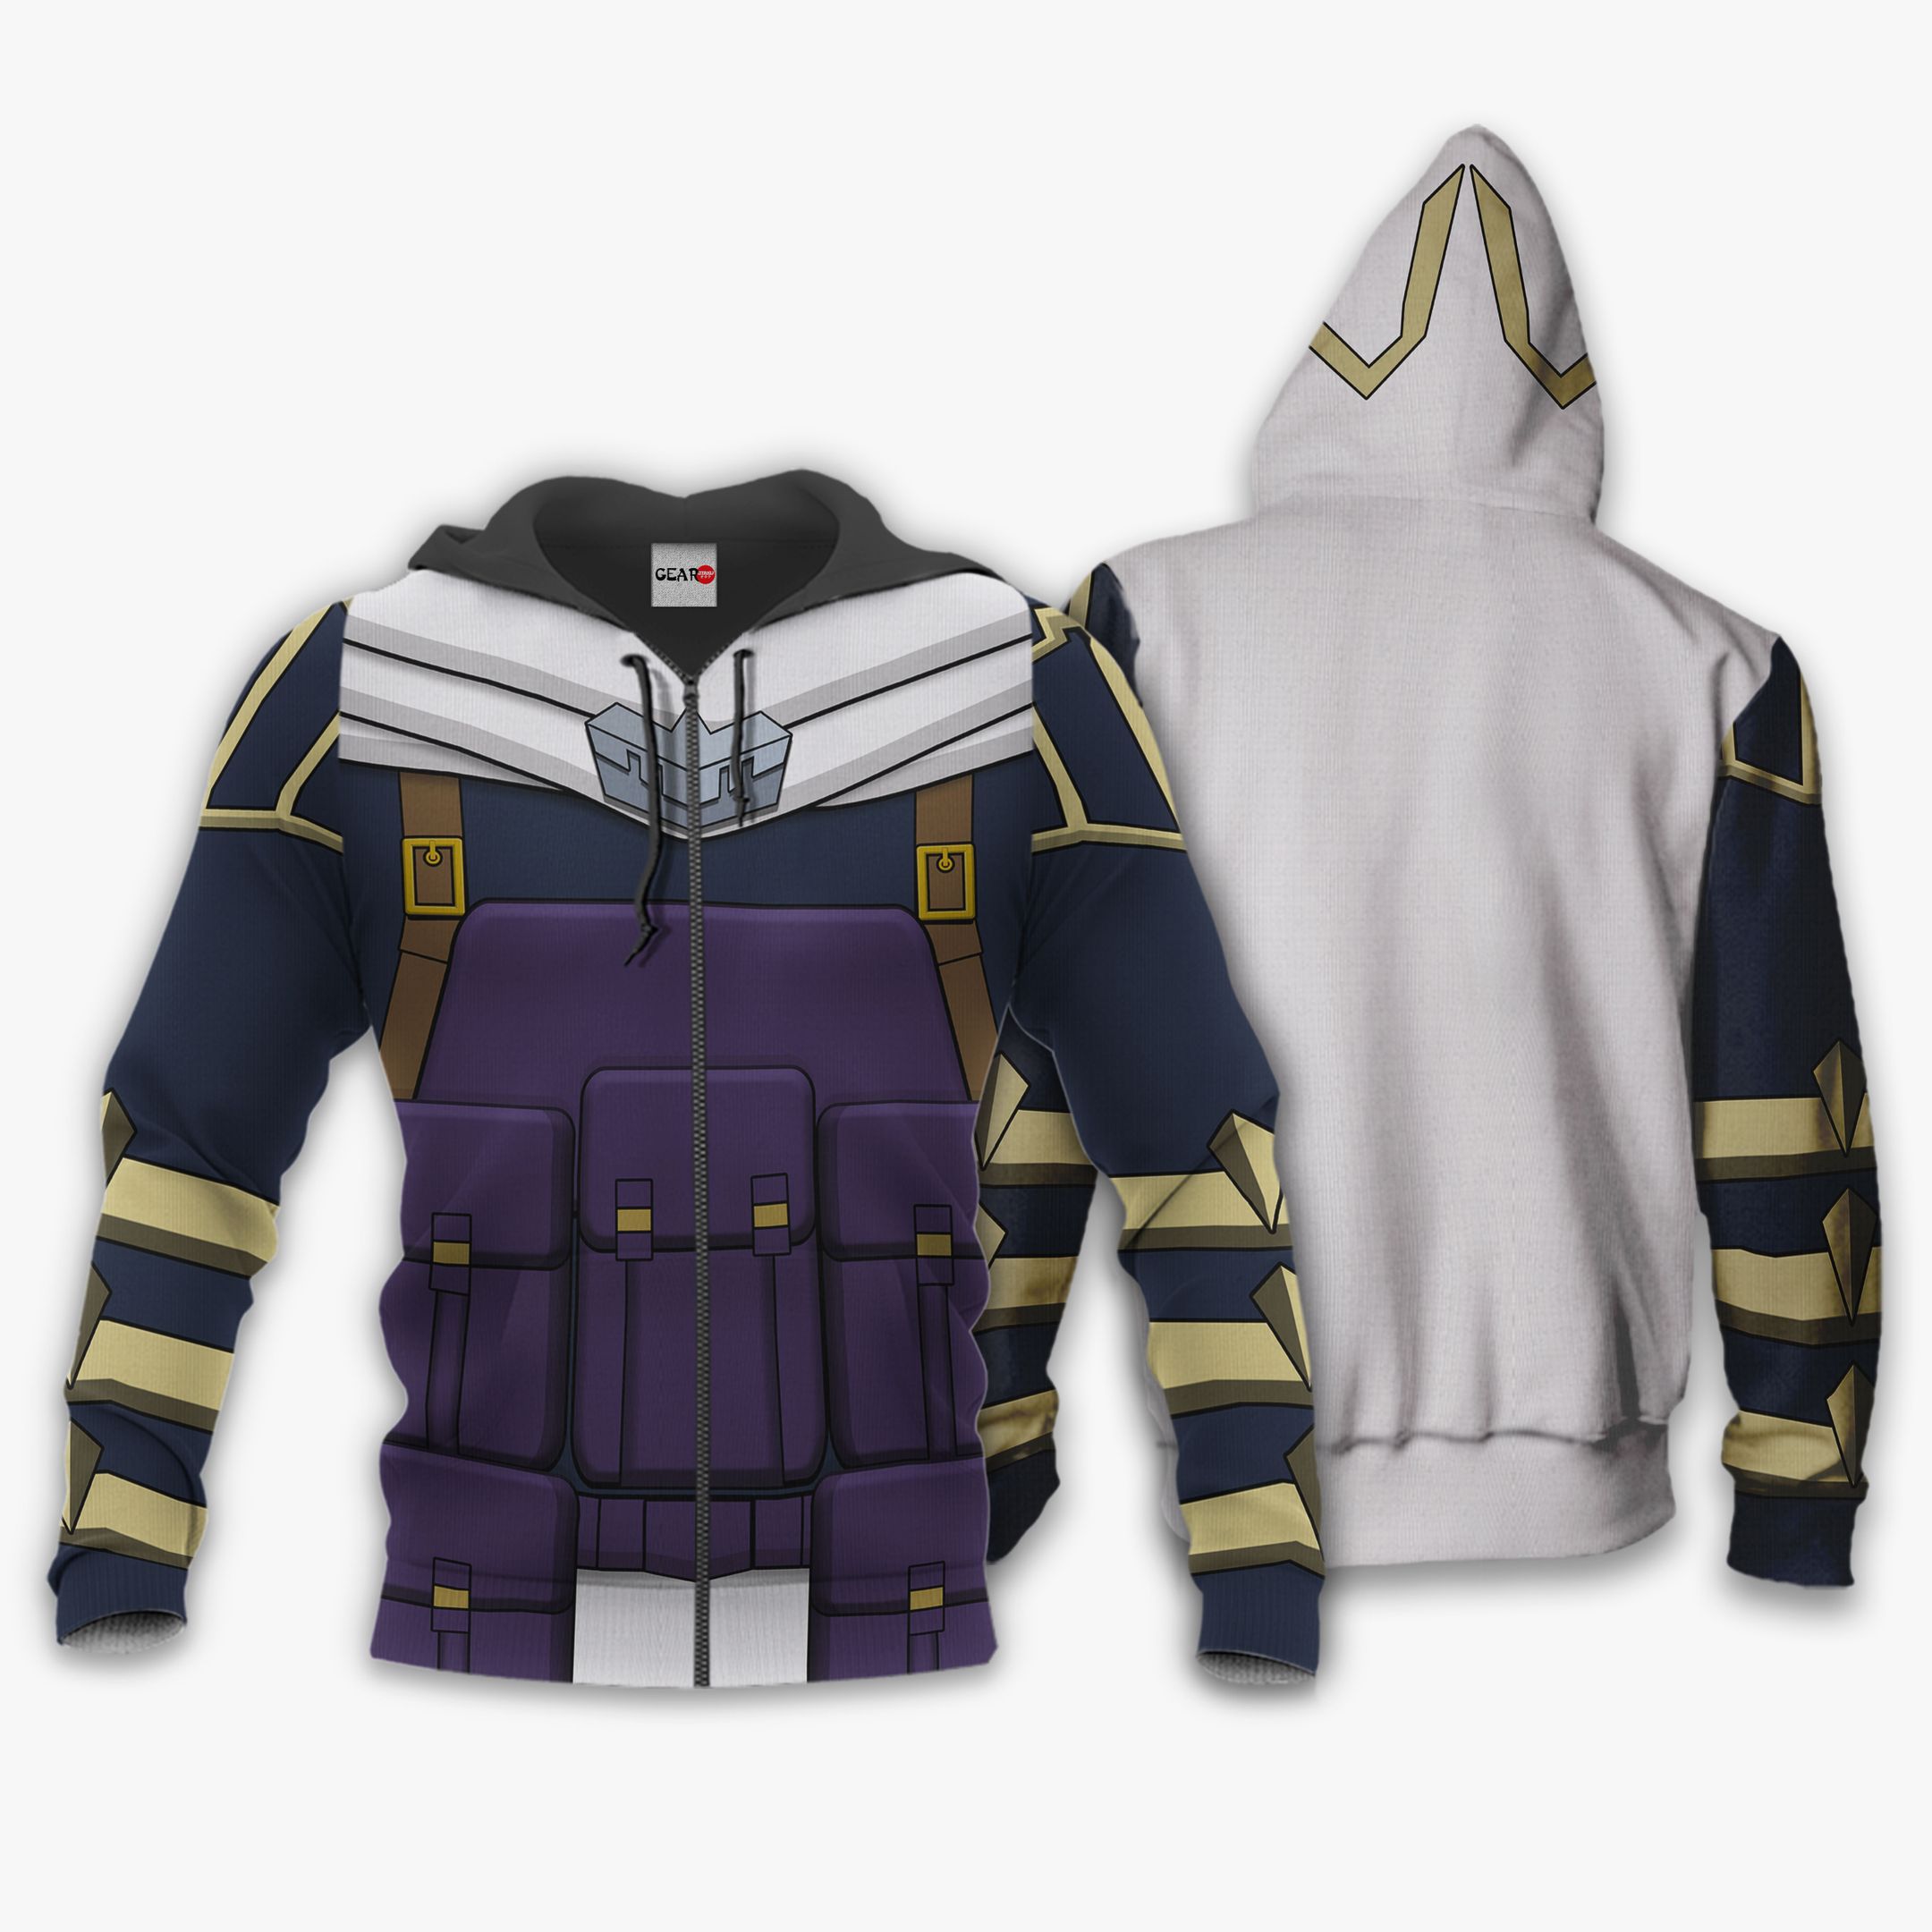 Below are some types of a Bomber Jacket for Anime Fan 22